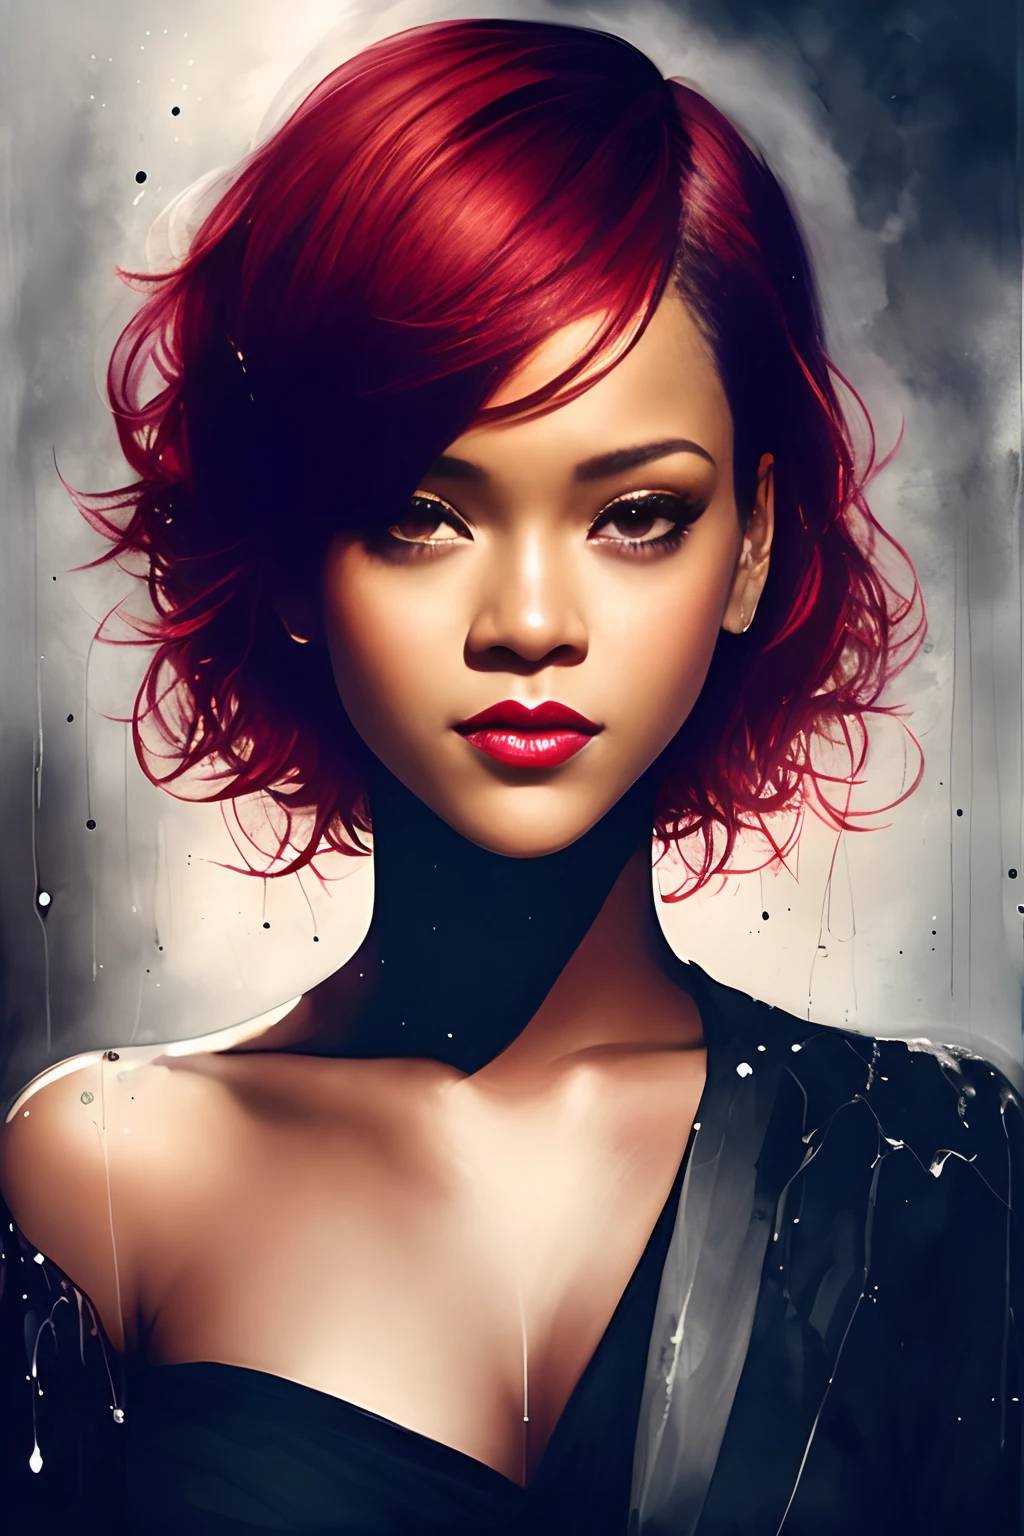 a woman (Rihanna) with short red hair, smile, by agnes cecile, luminous design, black and white, ink drips, autumn lights